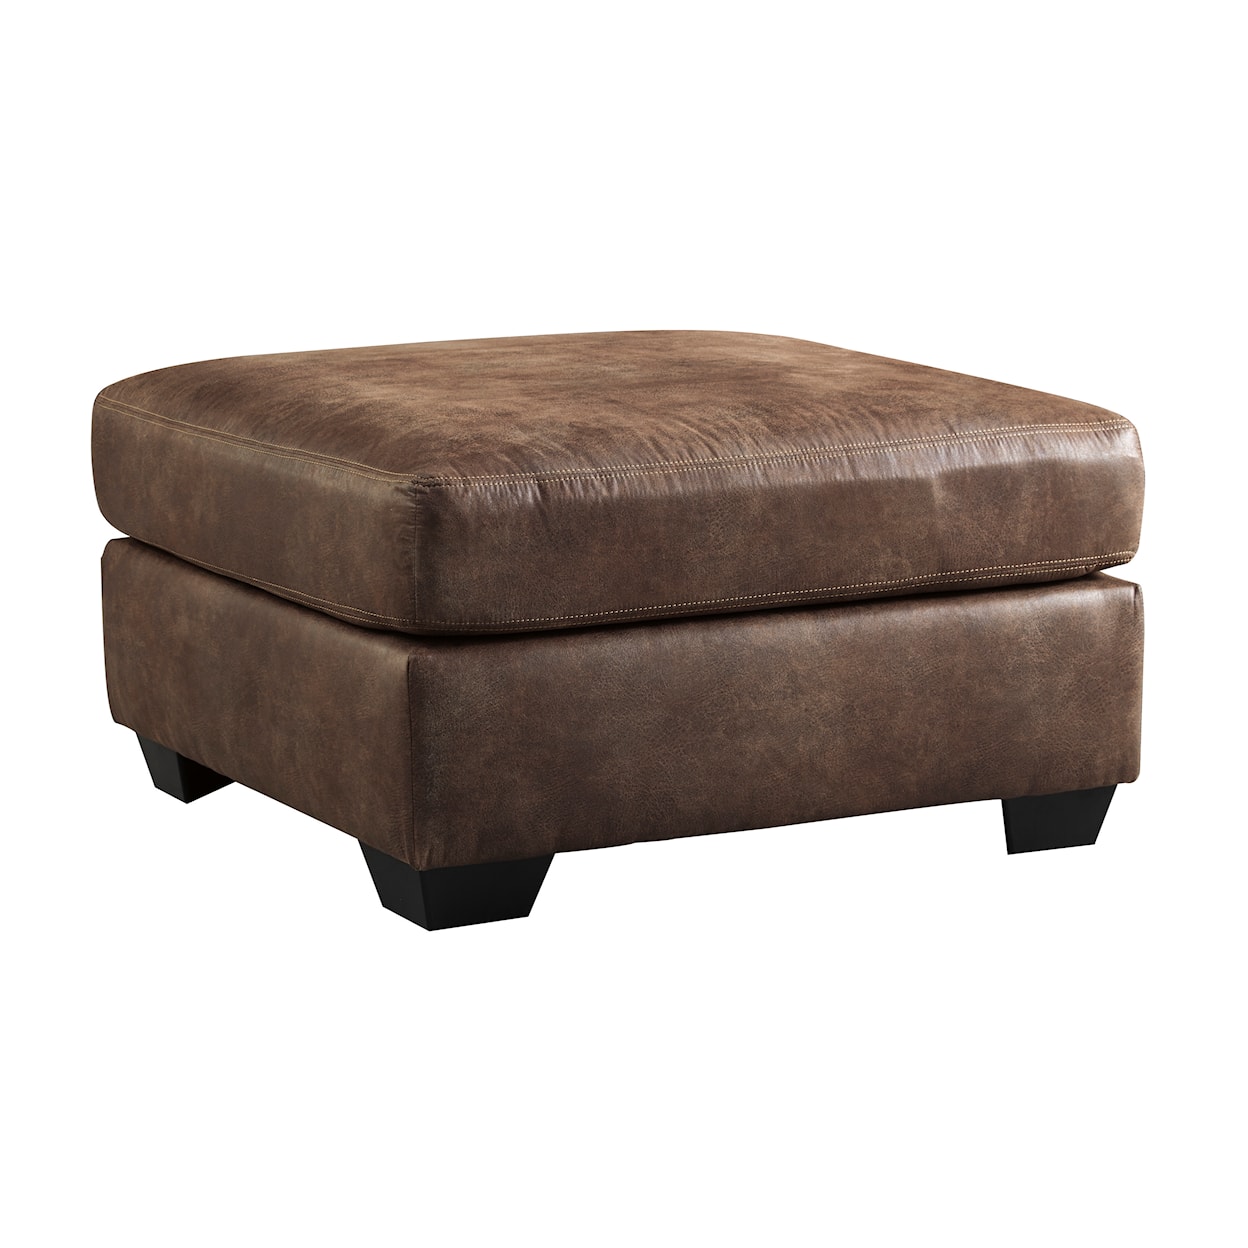 Signature Design by Ashley Bladen Oversized Accent Ottoman